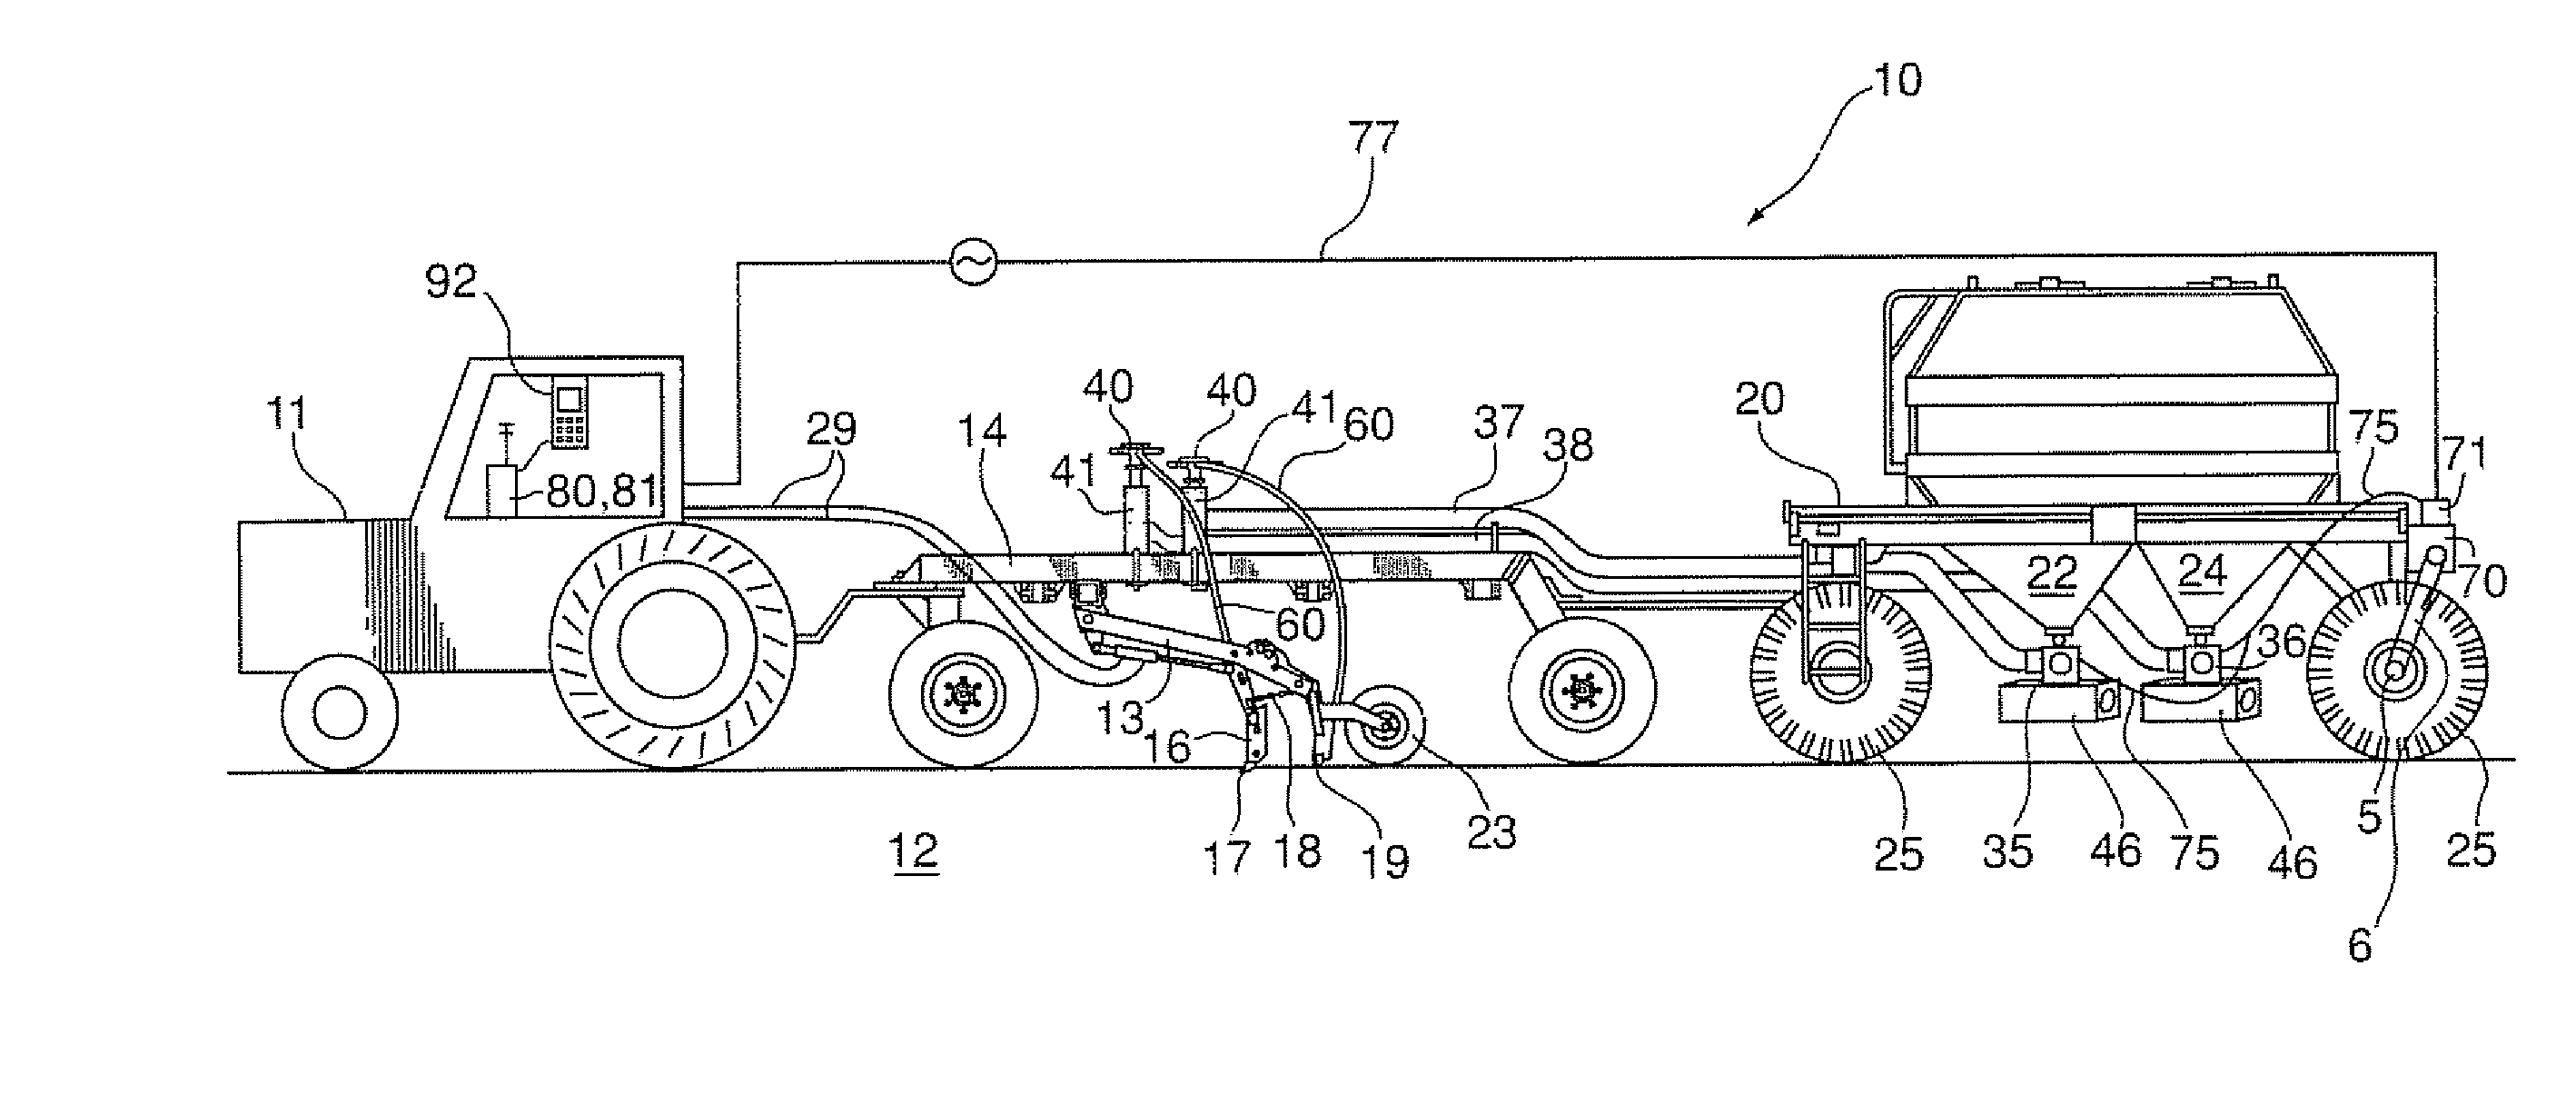 Air seeder/fertilizer apparatus having metering means and distribution manifold with selectively openable ports